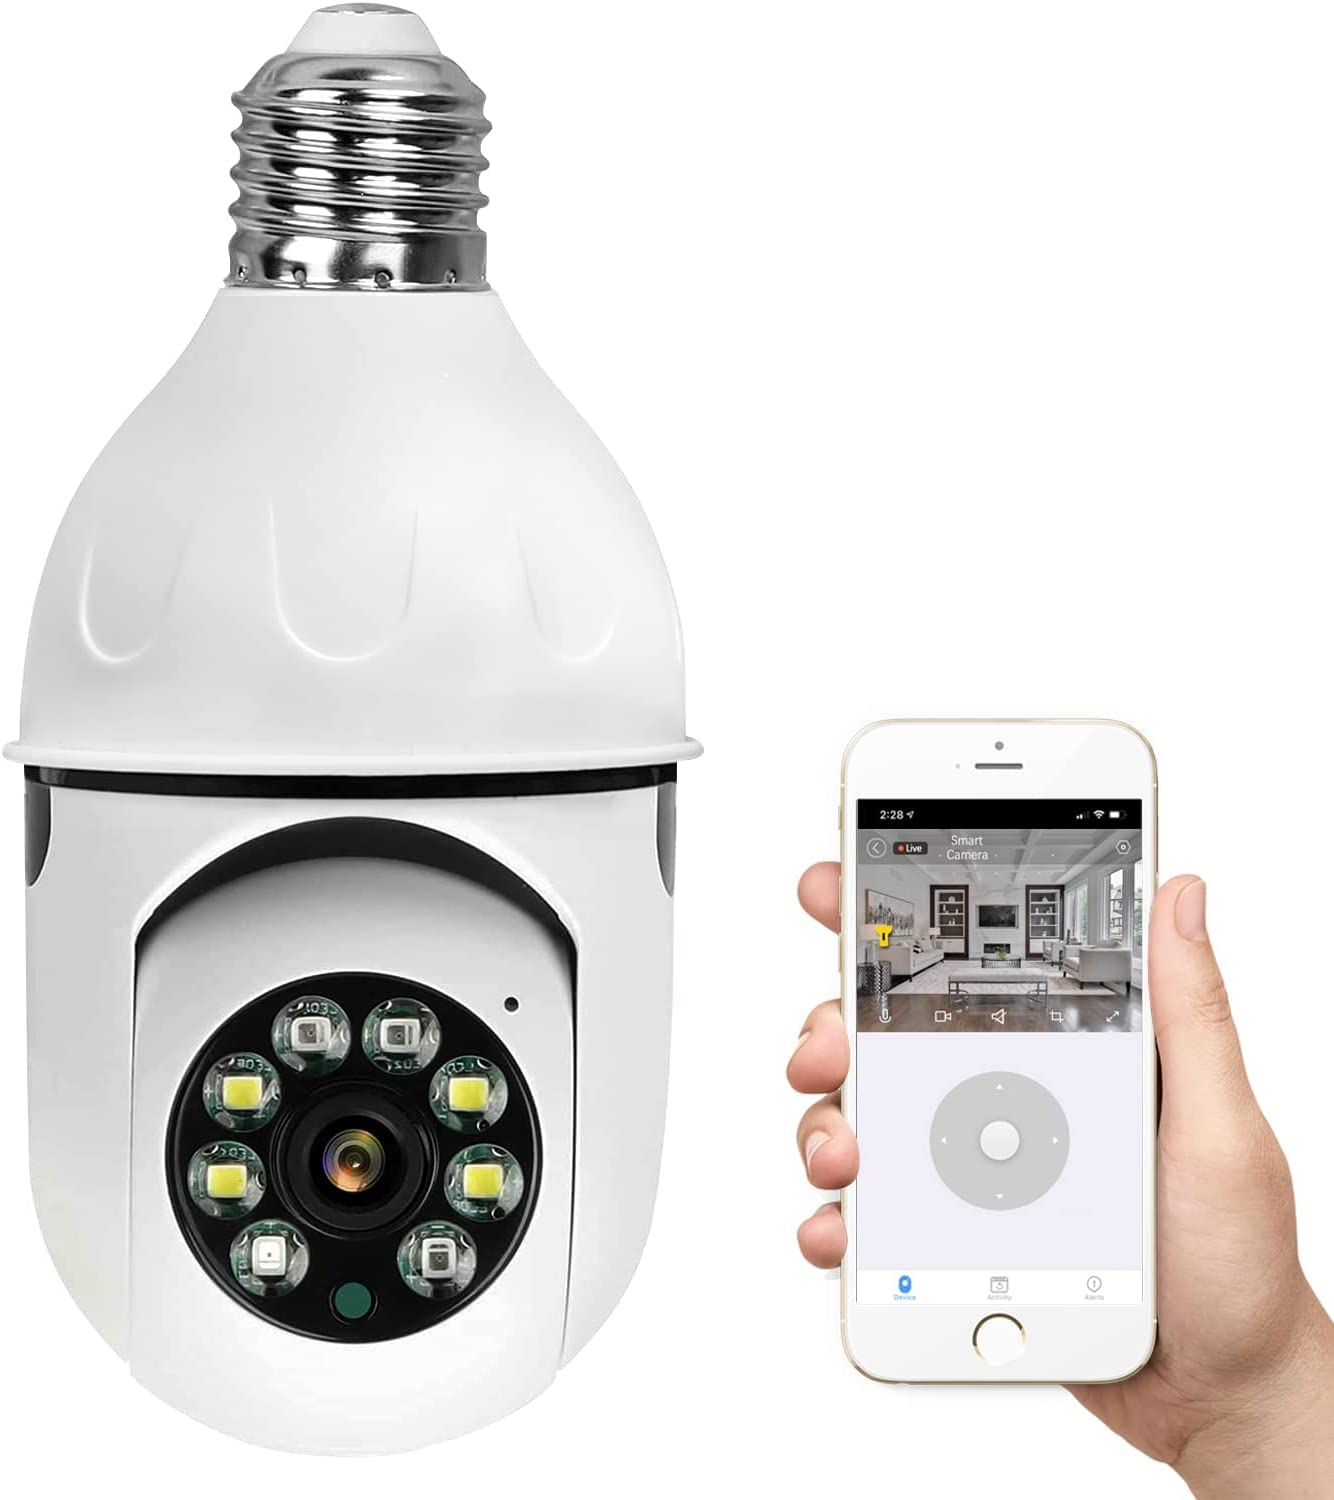 WOSECU E27 Light Bulb Camera,2Mp 360 Degree Panoramic Wireless Home Bulb Security System ,2.4Ghz Wireless Wifi Surveillance Camera with Night Vision, Two -Way Audio,Motion Detection Alarm